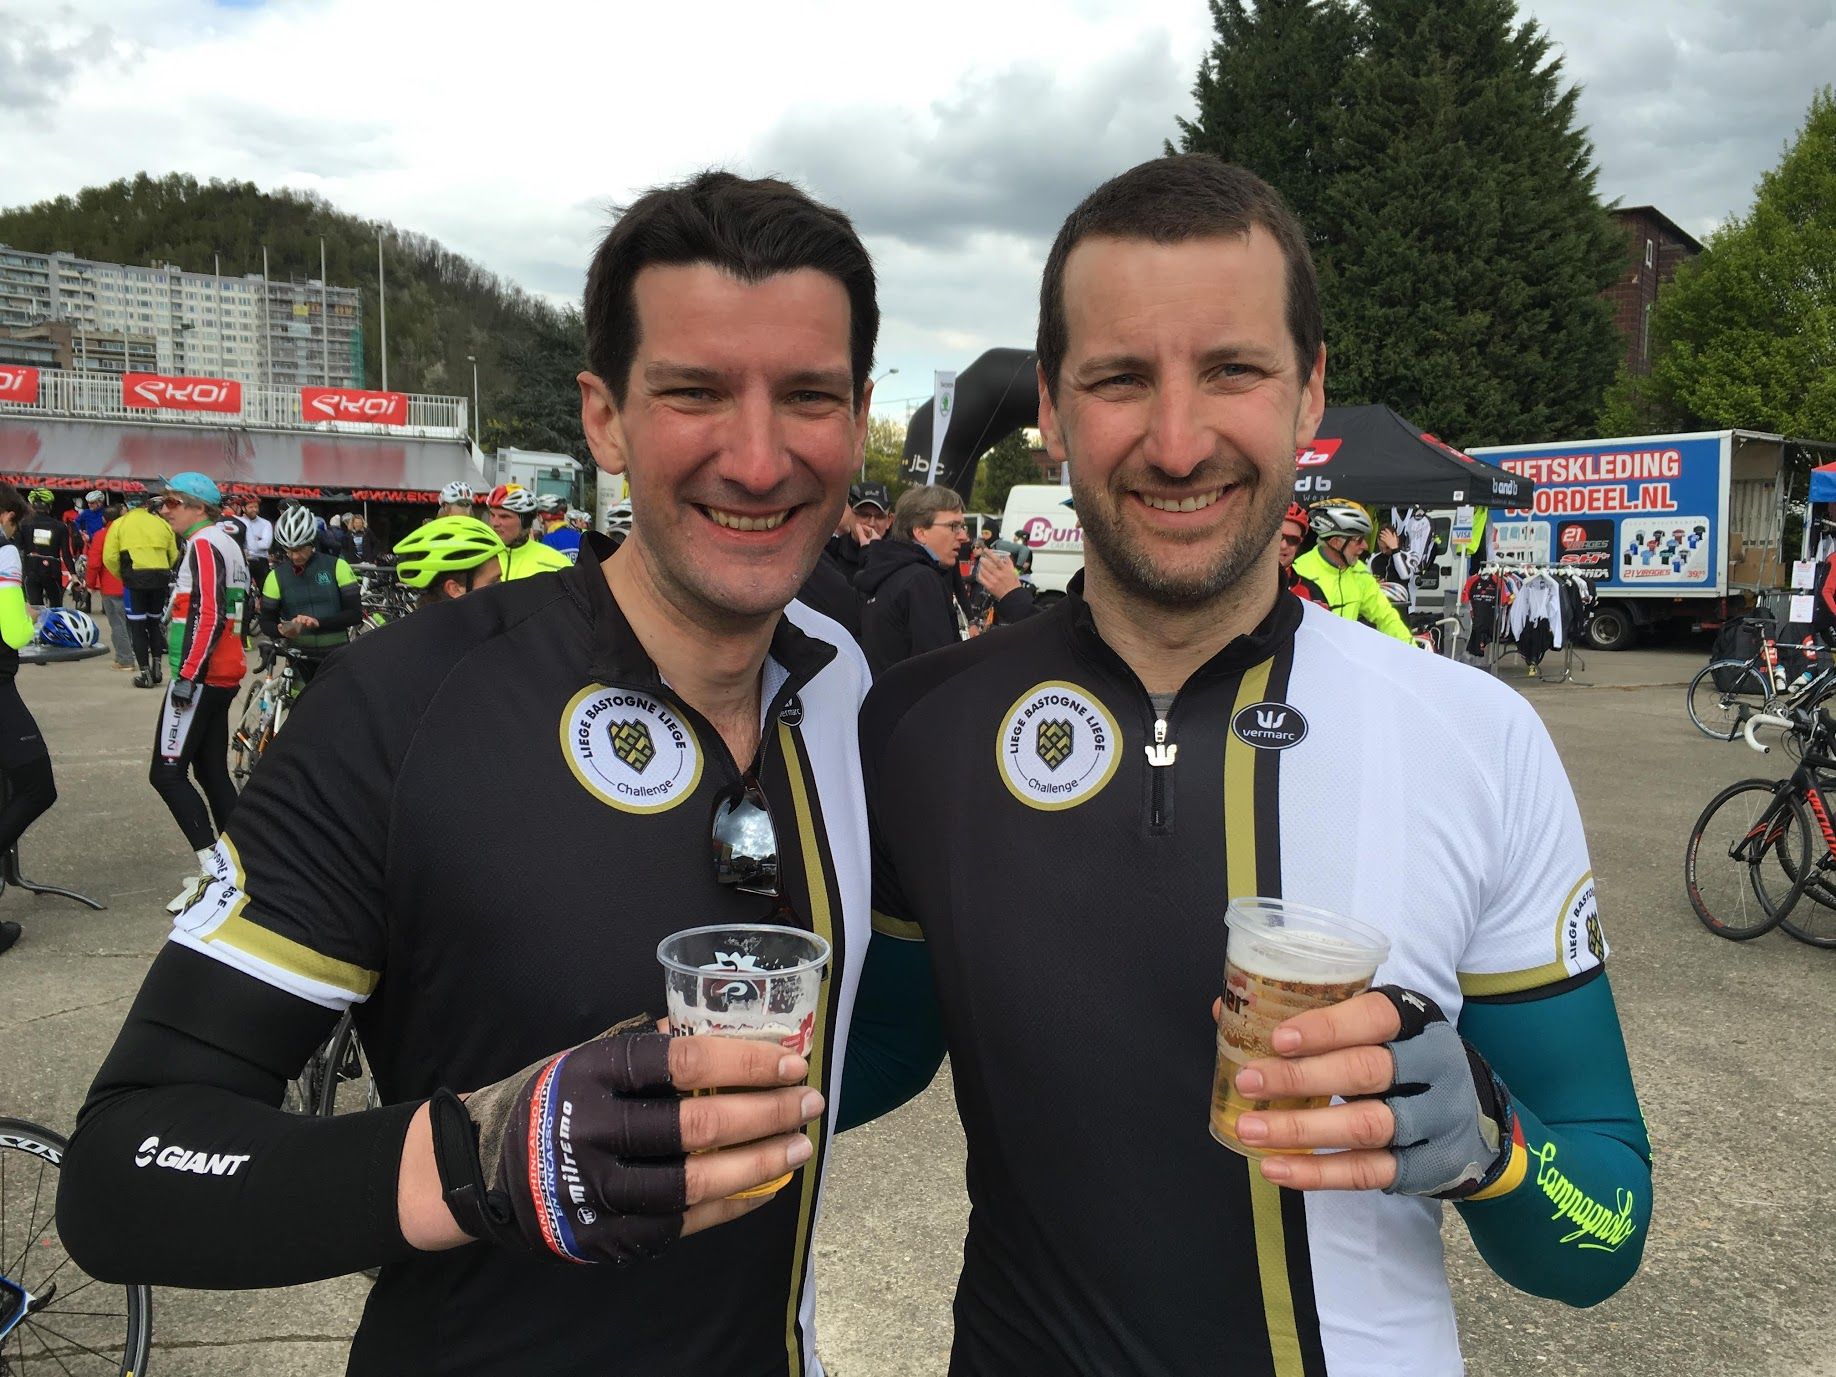 Riding your first sportive abroad